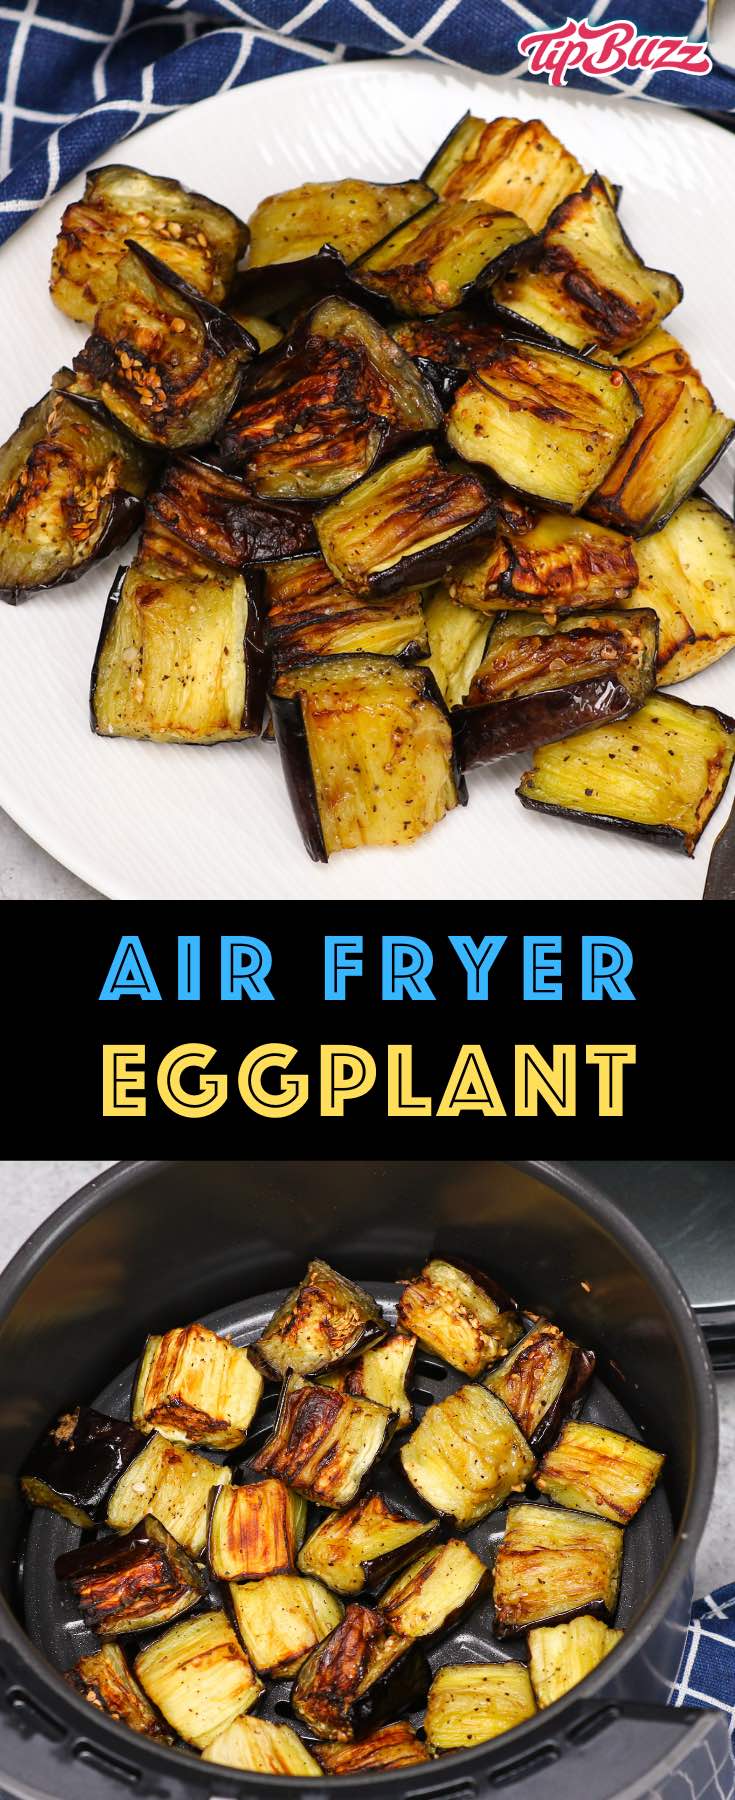 This Air Fryer Eggplant is a healthy and flavorful side dish that’s ready in under 20 minutes! Keep reading to learn how to roast eggplant in an air fryer quickly and easily. #AirFryerEggplant